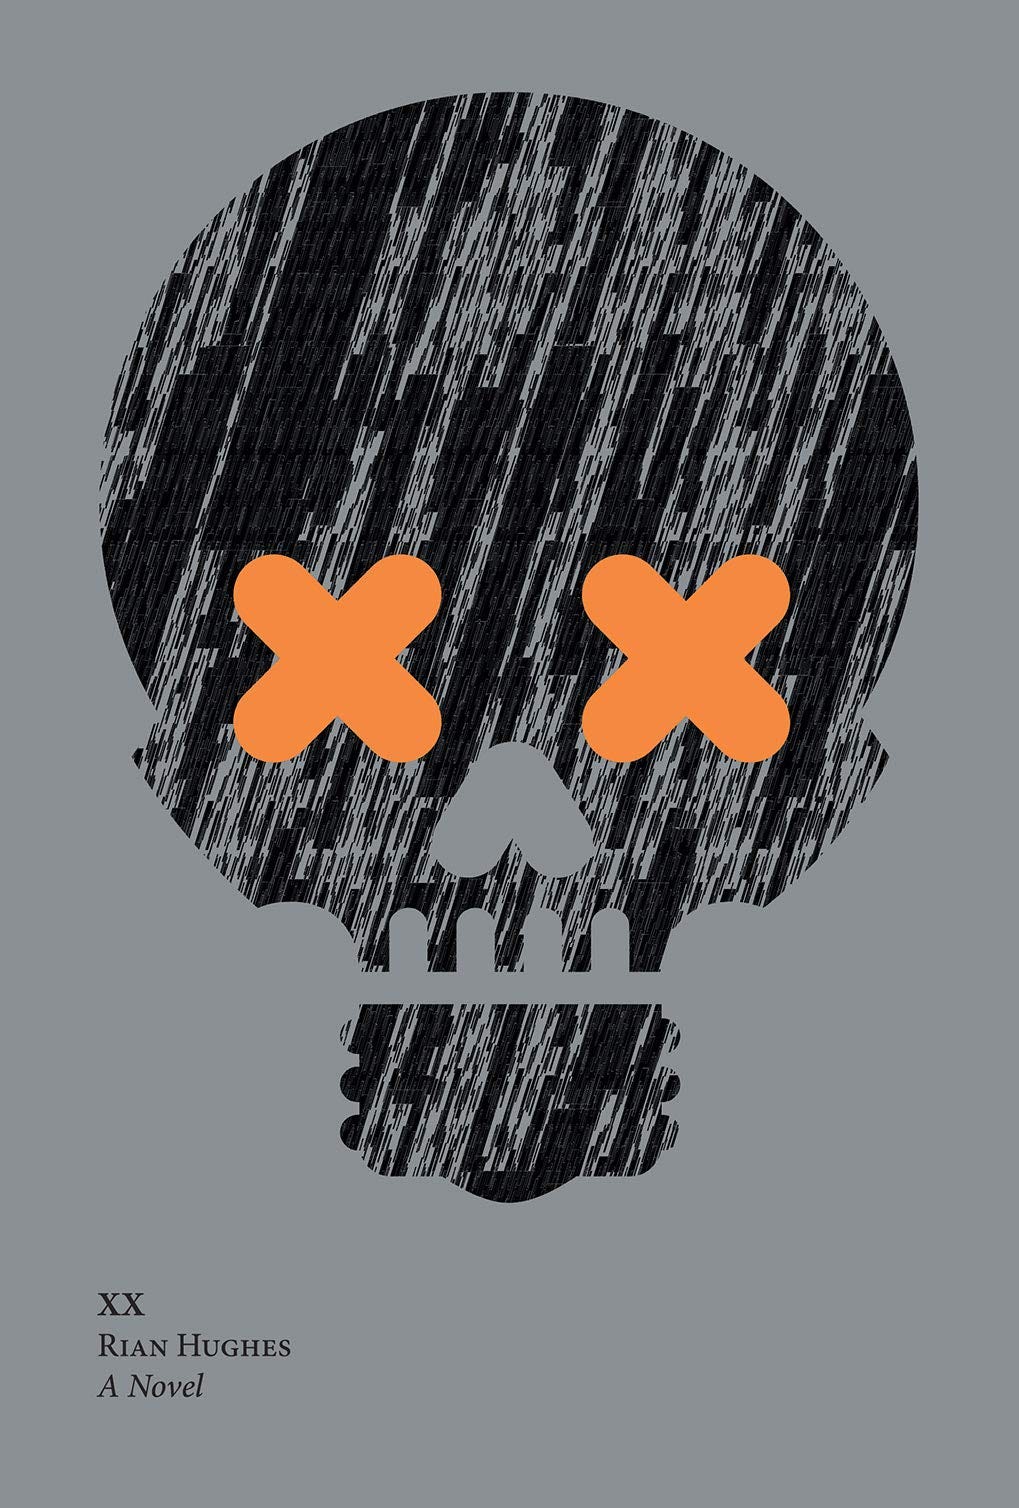 Book cover of Rian Hughes' XX: A Novel. A skull with orange X eyes is against a grey background. 